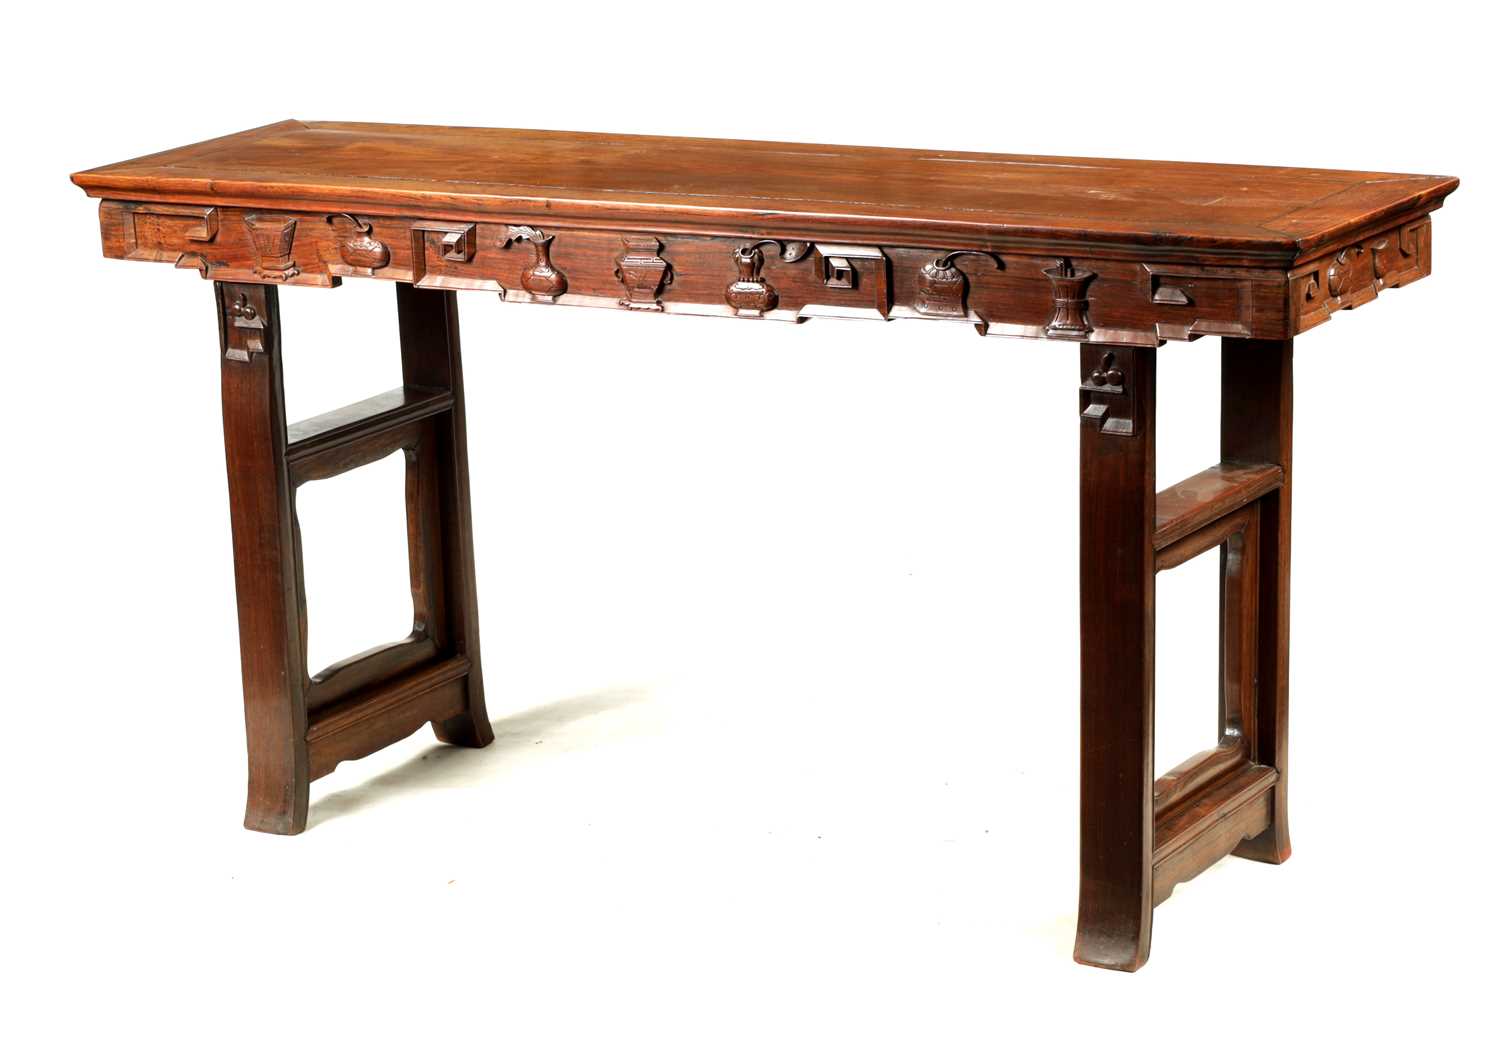 Lot 110 - A 19TH CENTURY CHINESE HARDWOOD ALTAR TABLE